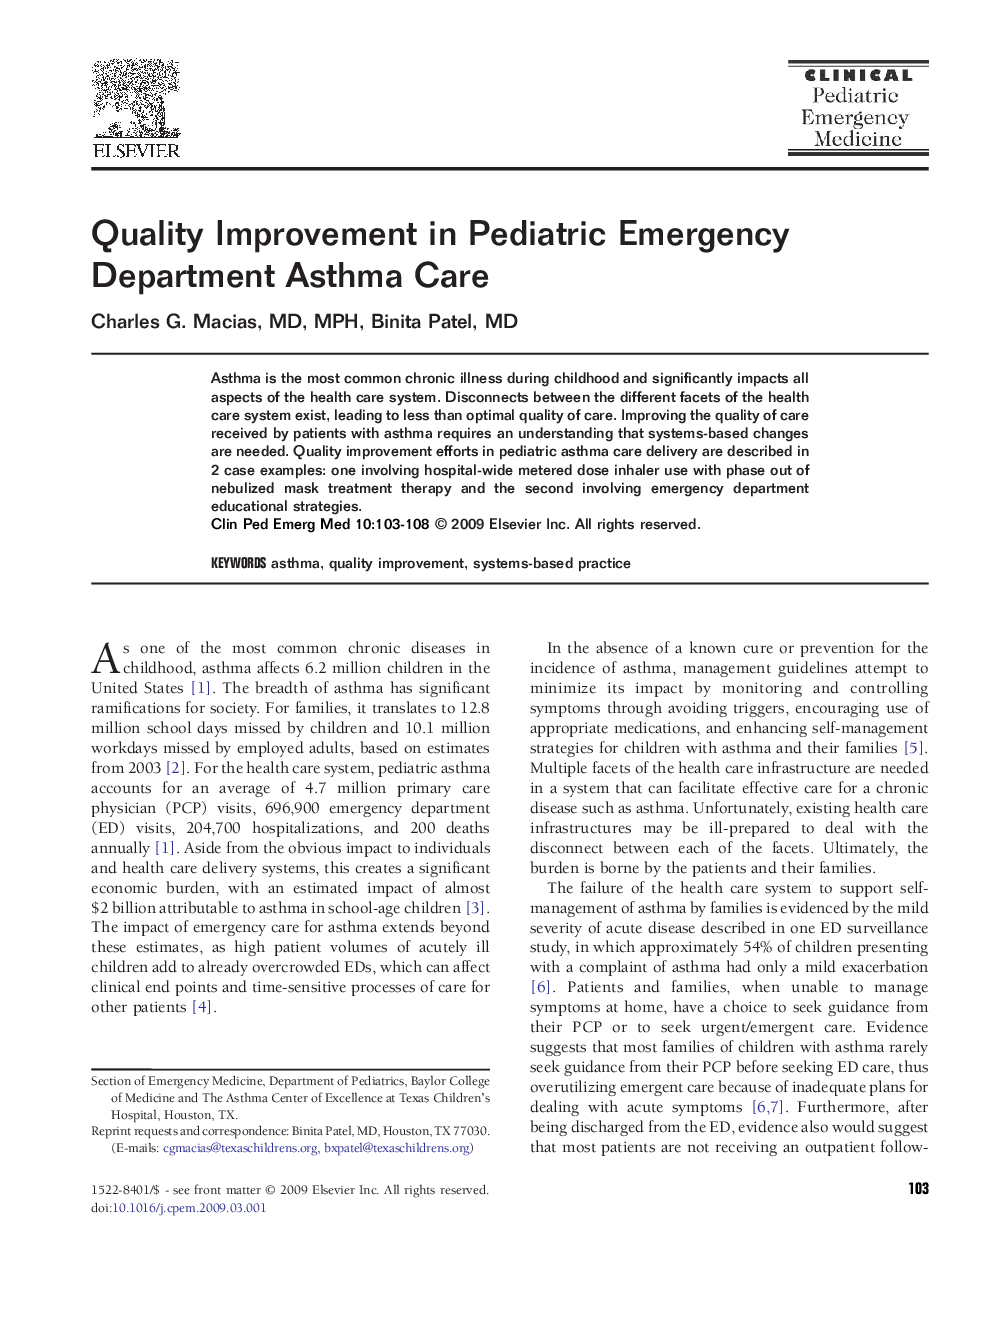 Quality Improvement in Pediatric Emergency Department Asthma Care